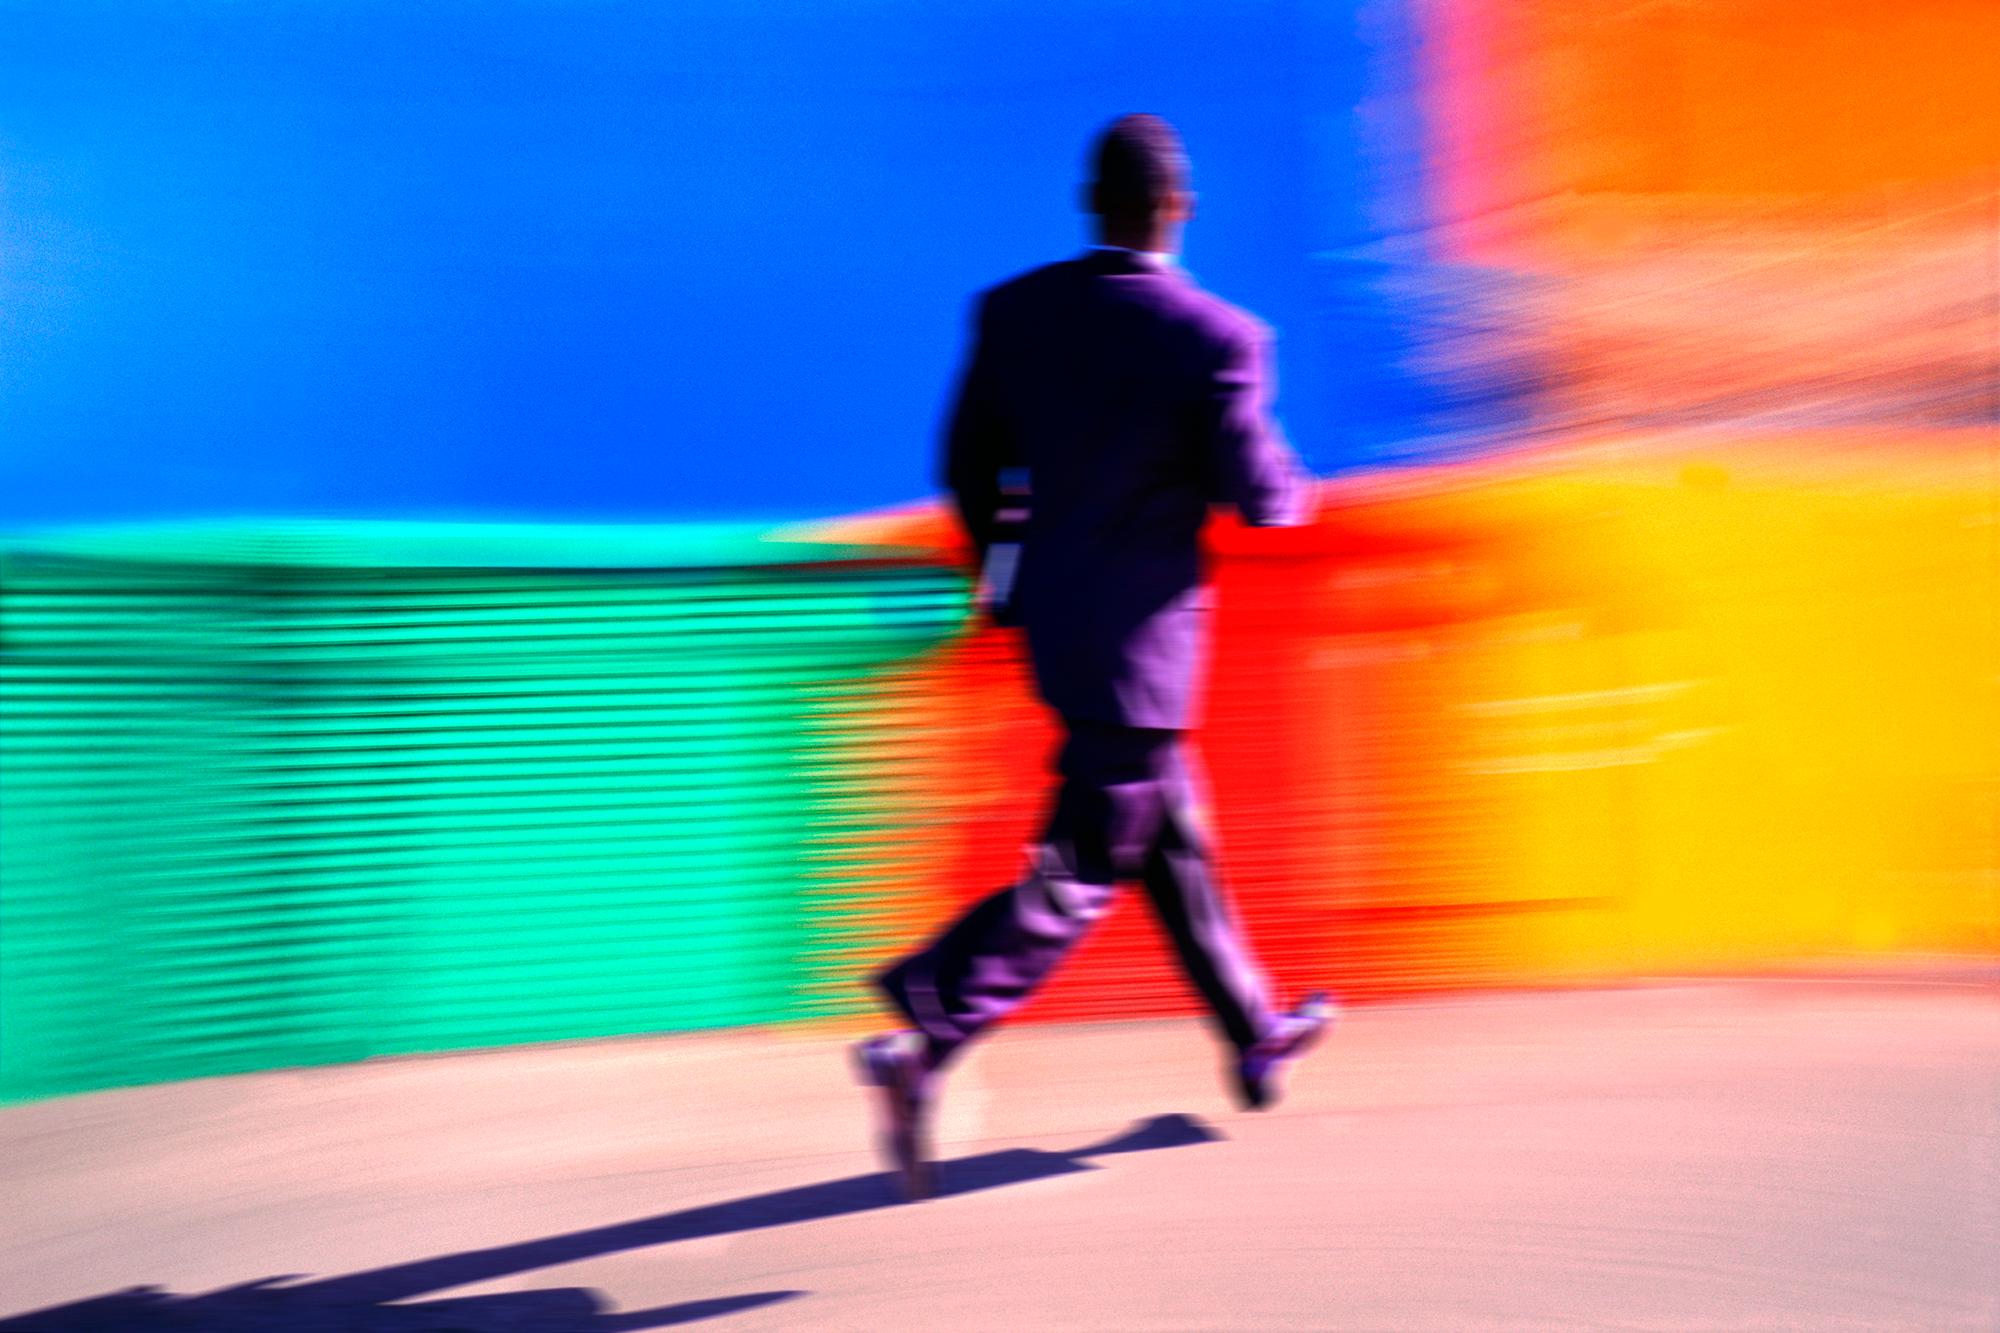 Black Businessman Running Against a Colorful Background